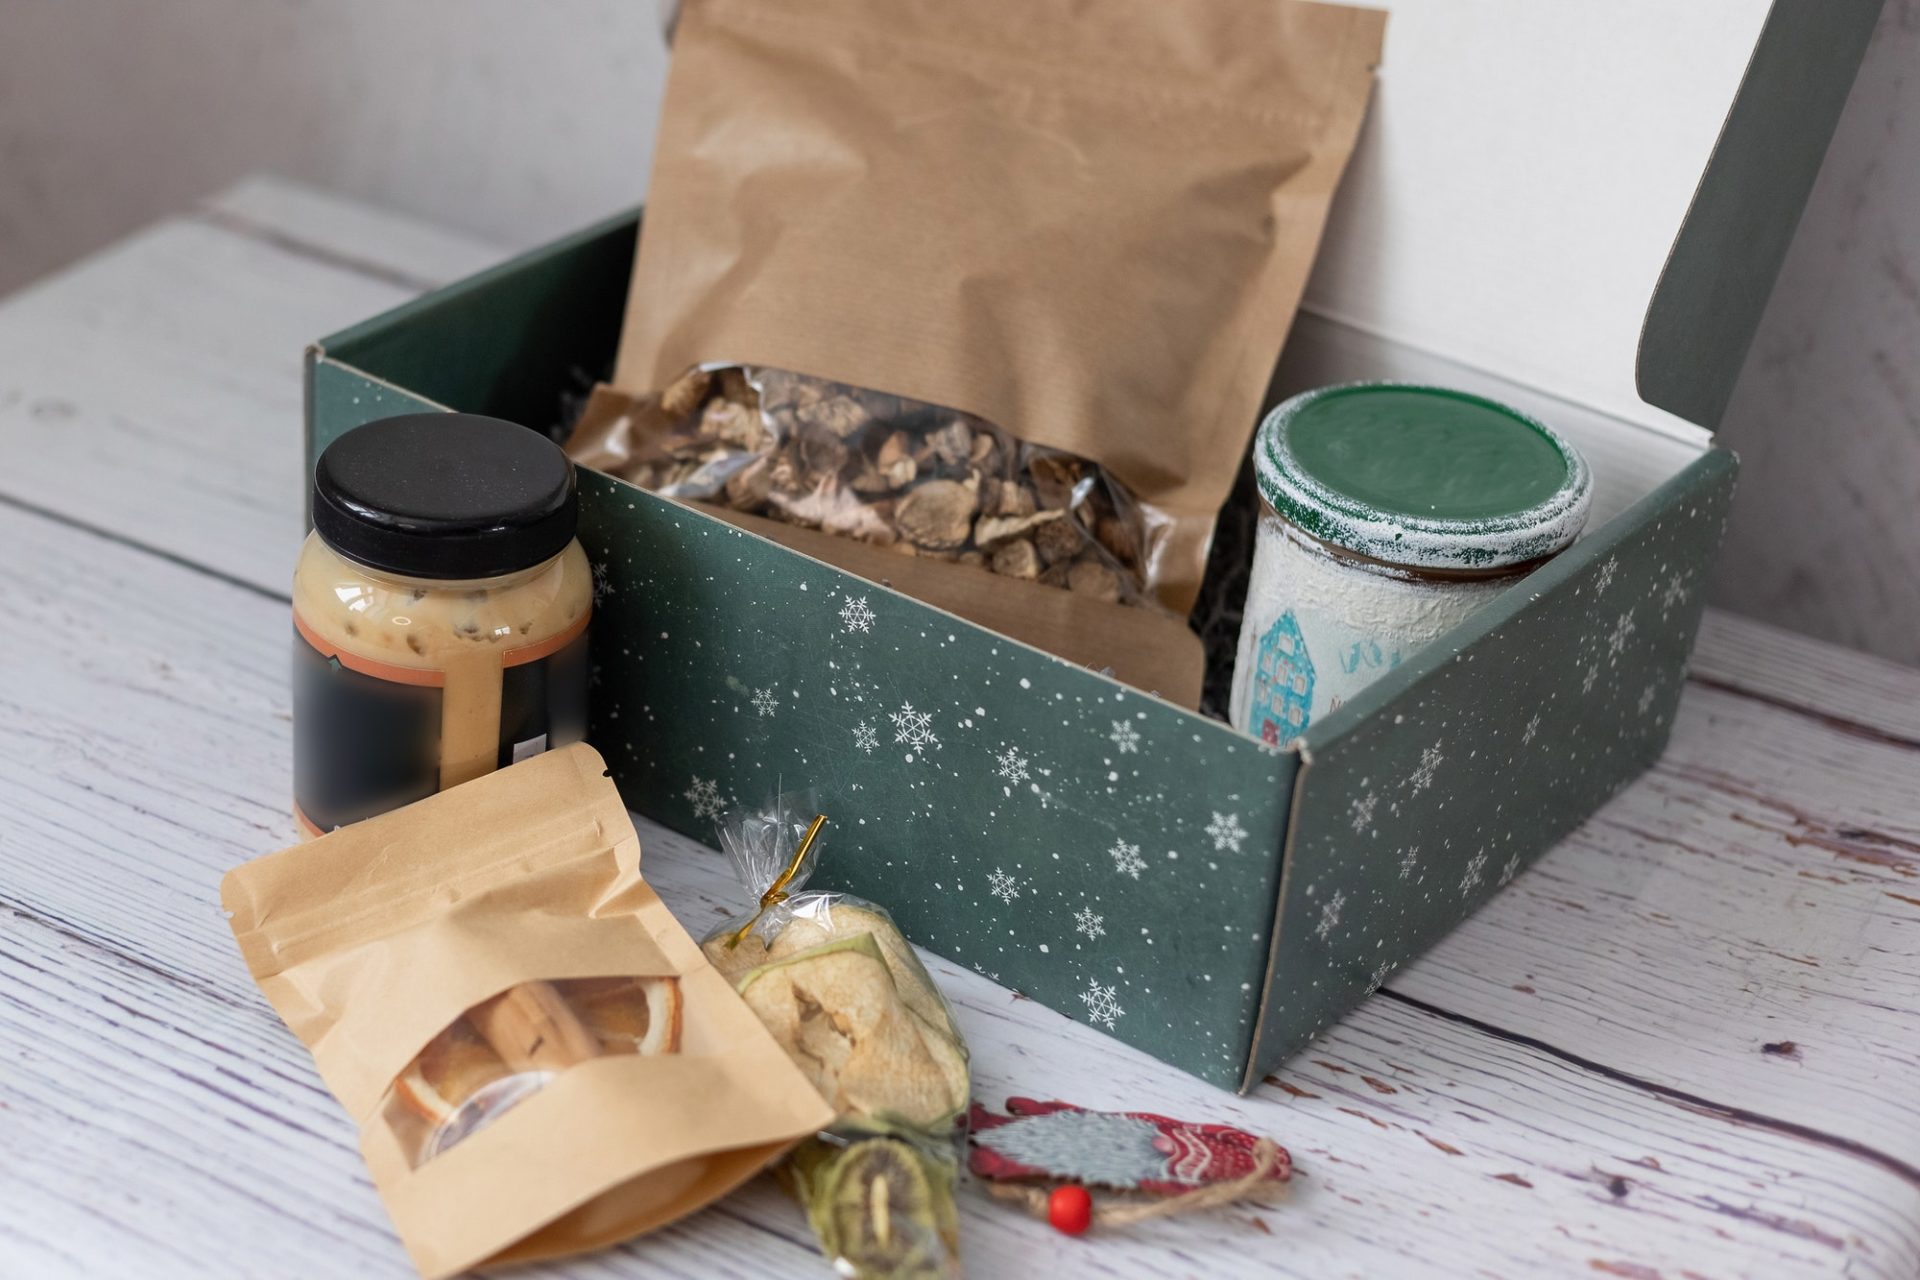 The idea of packaging and gift. A box for an autumn or winter gift with sweets and dried vegetables,